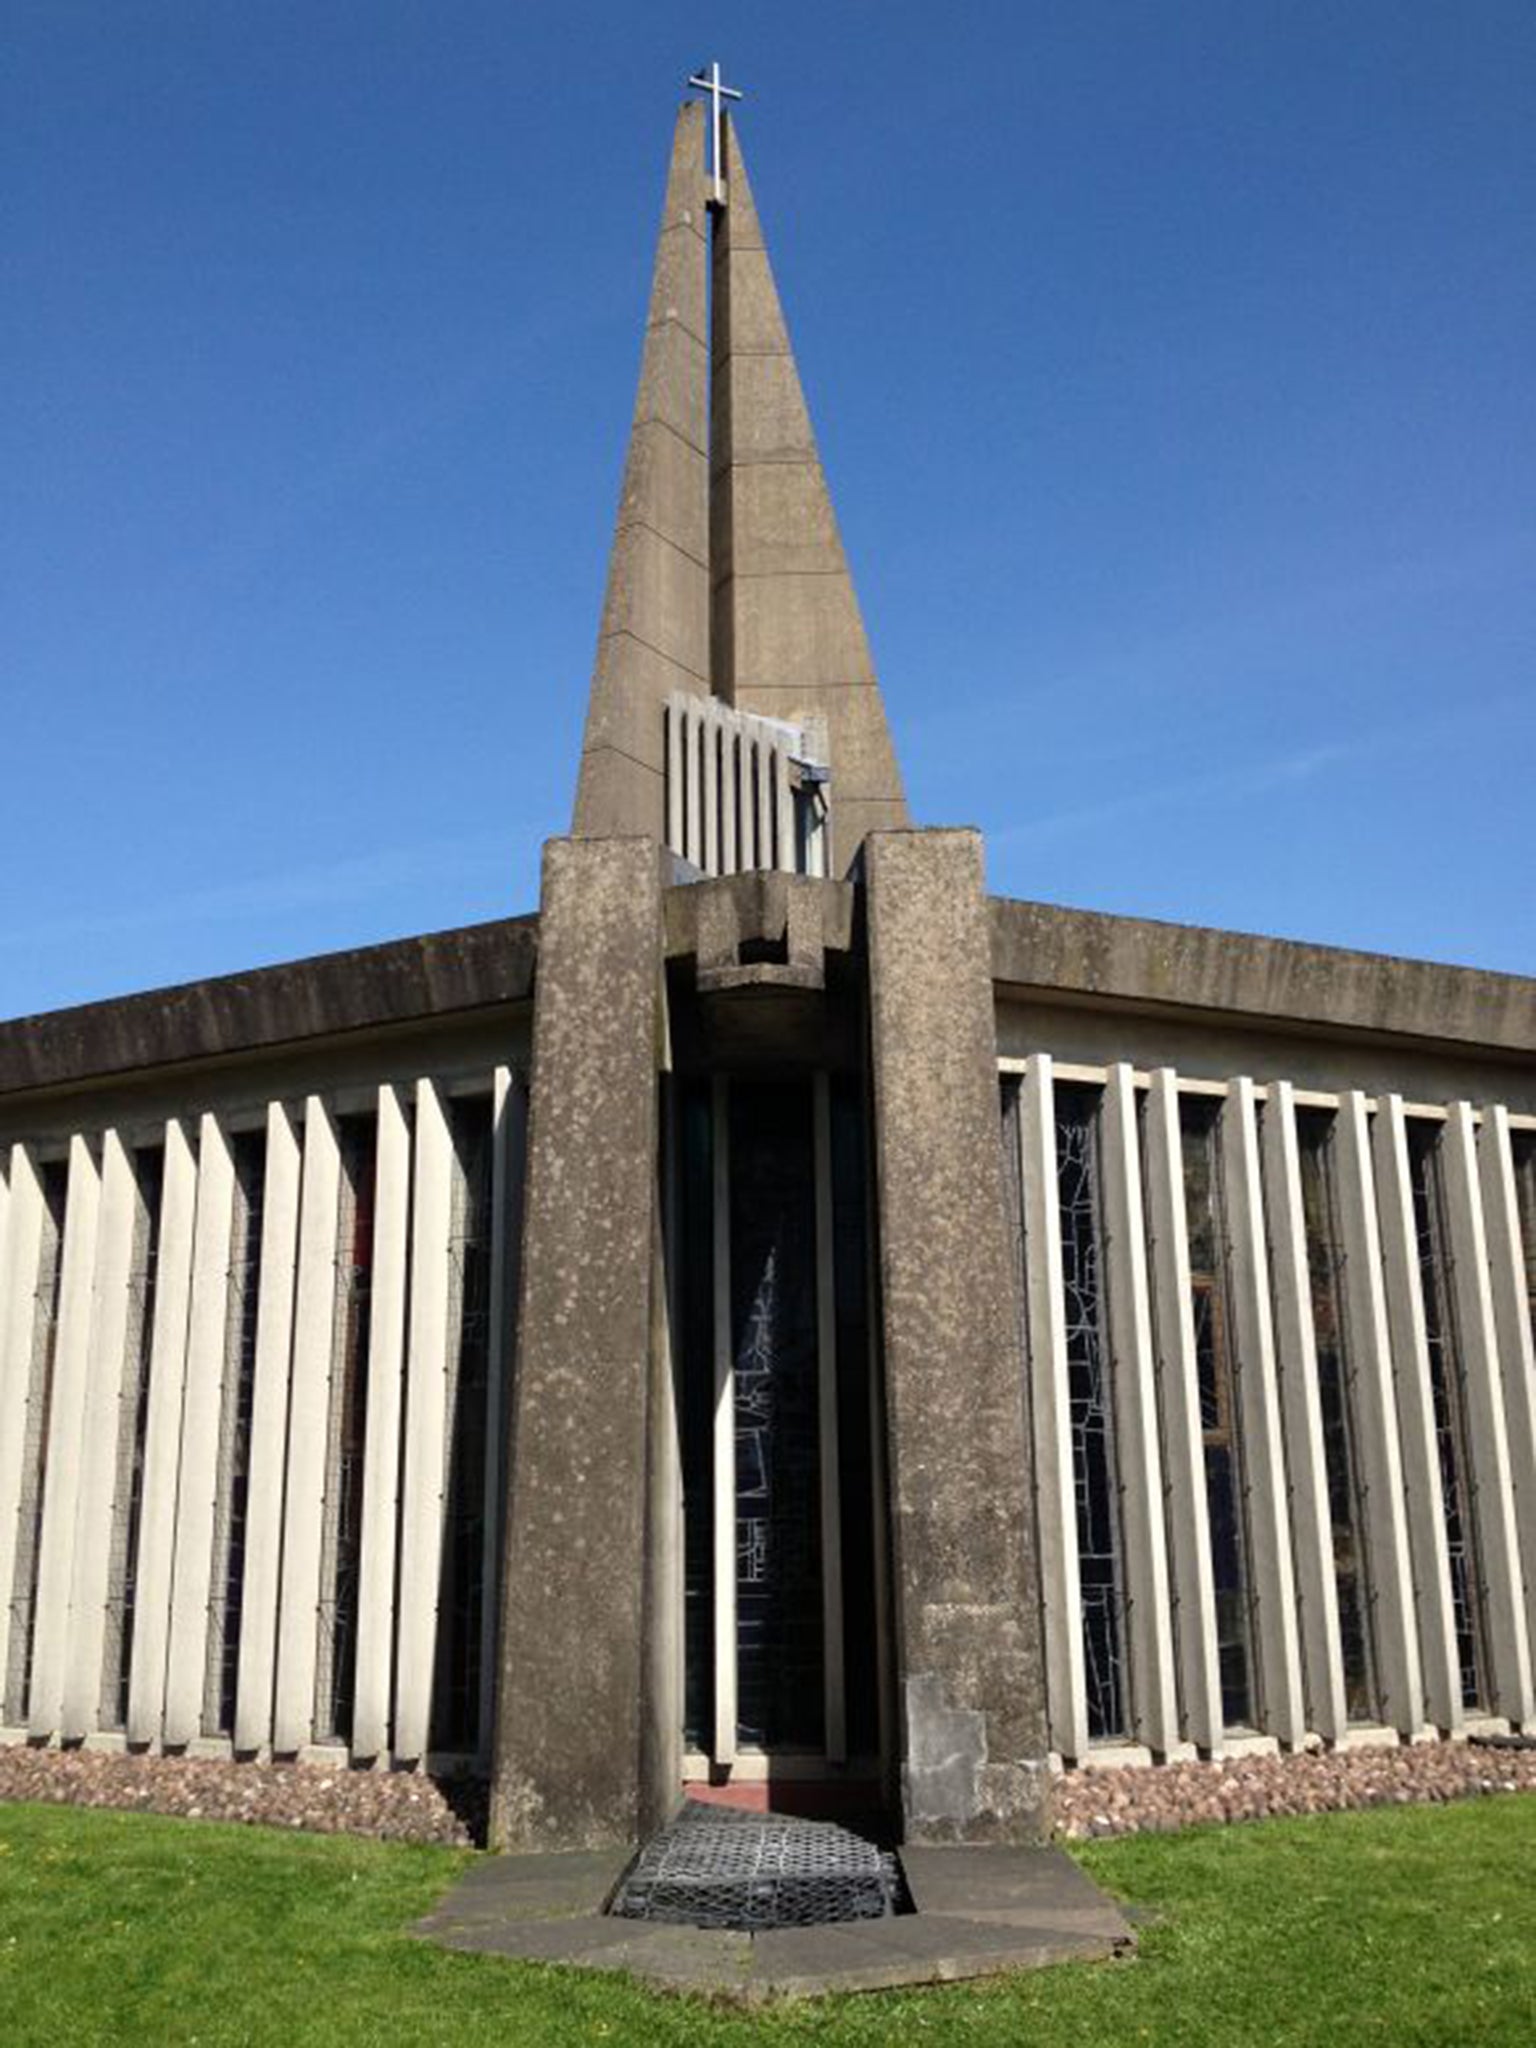 The concrete Church of St Thomas More in Birmingham is another at-risk site